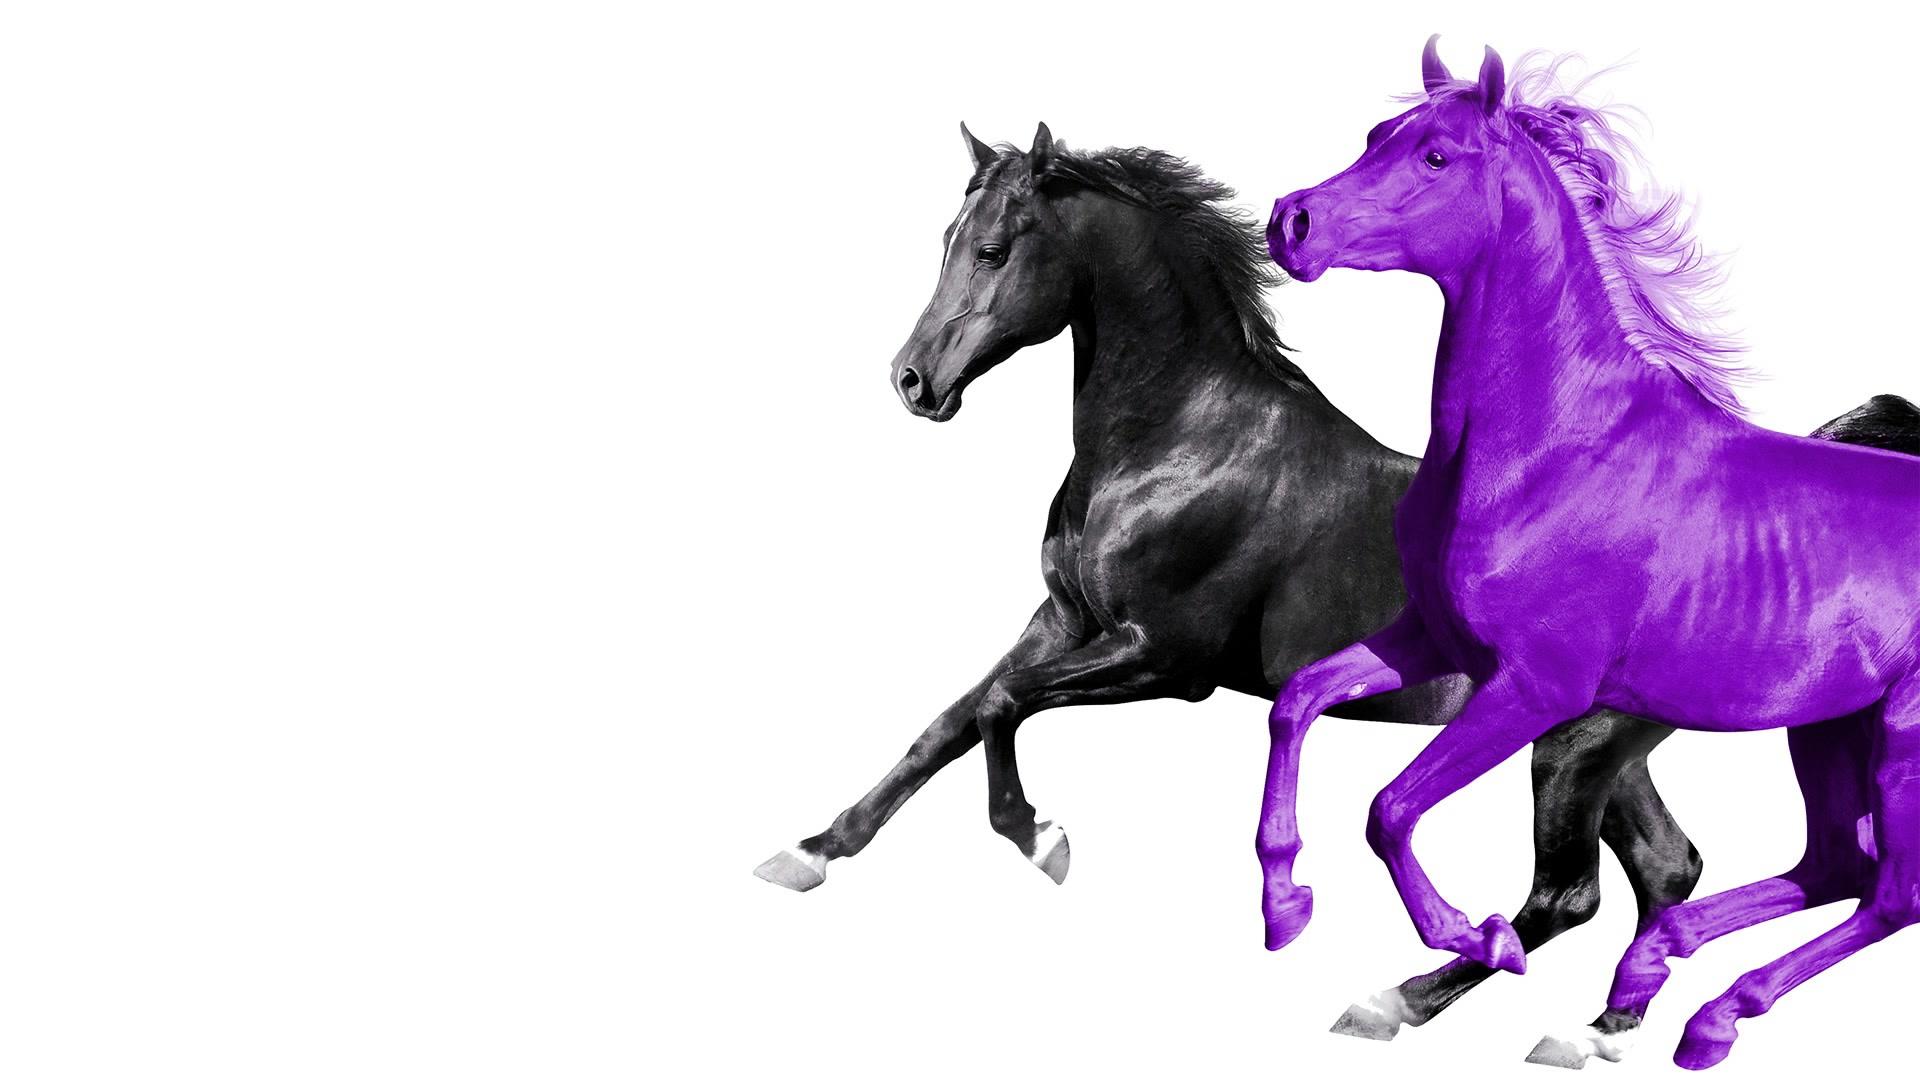 Lil Nas X - Old Town Road (feat. RM of BTS) (Seoul Town Road Remix - Official Audio)